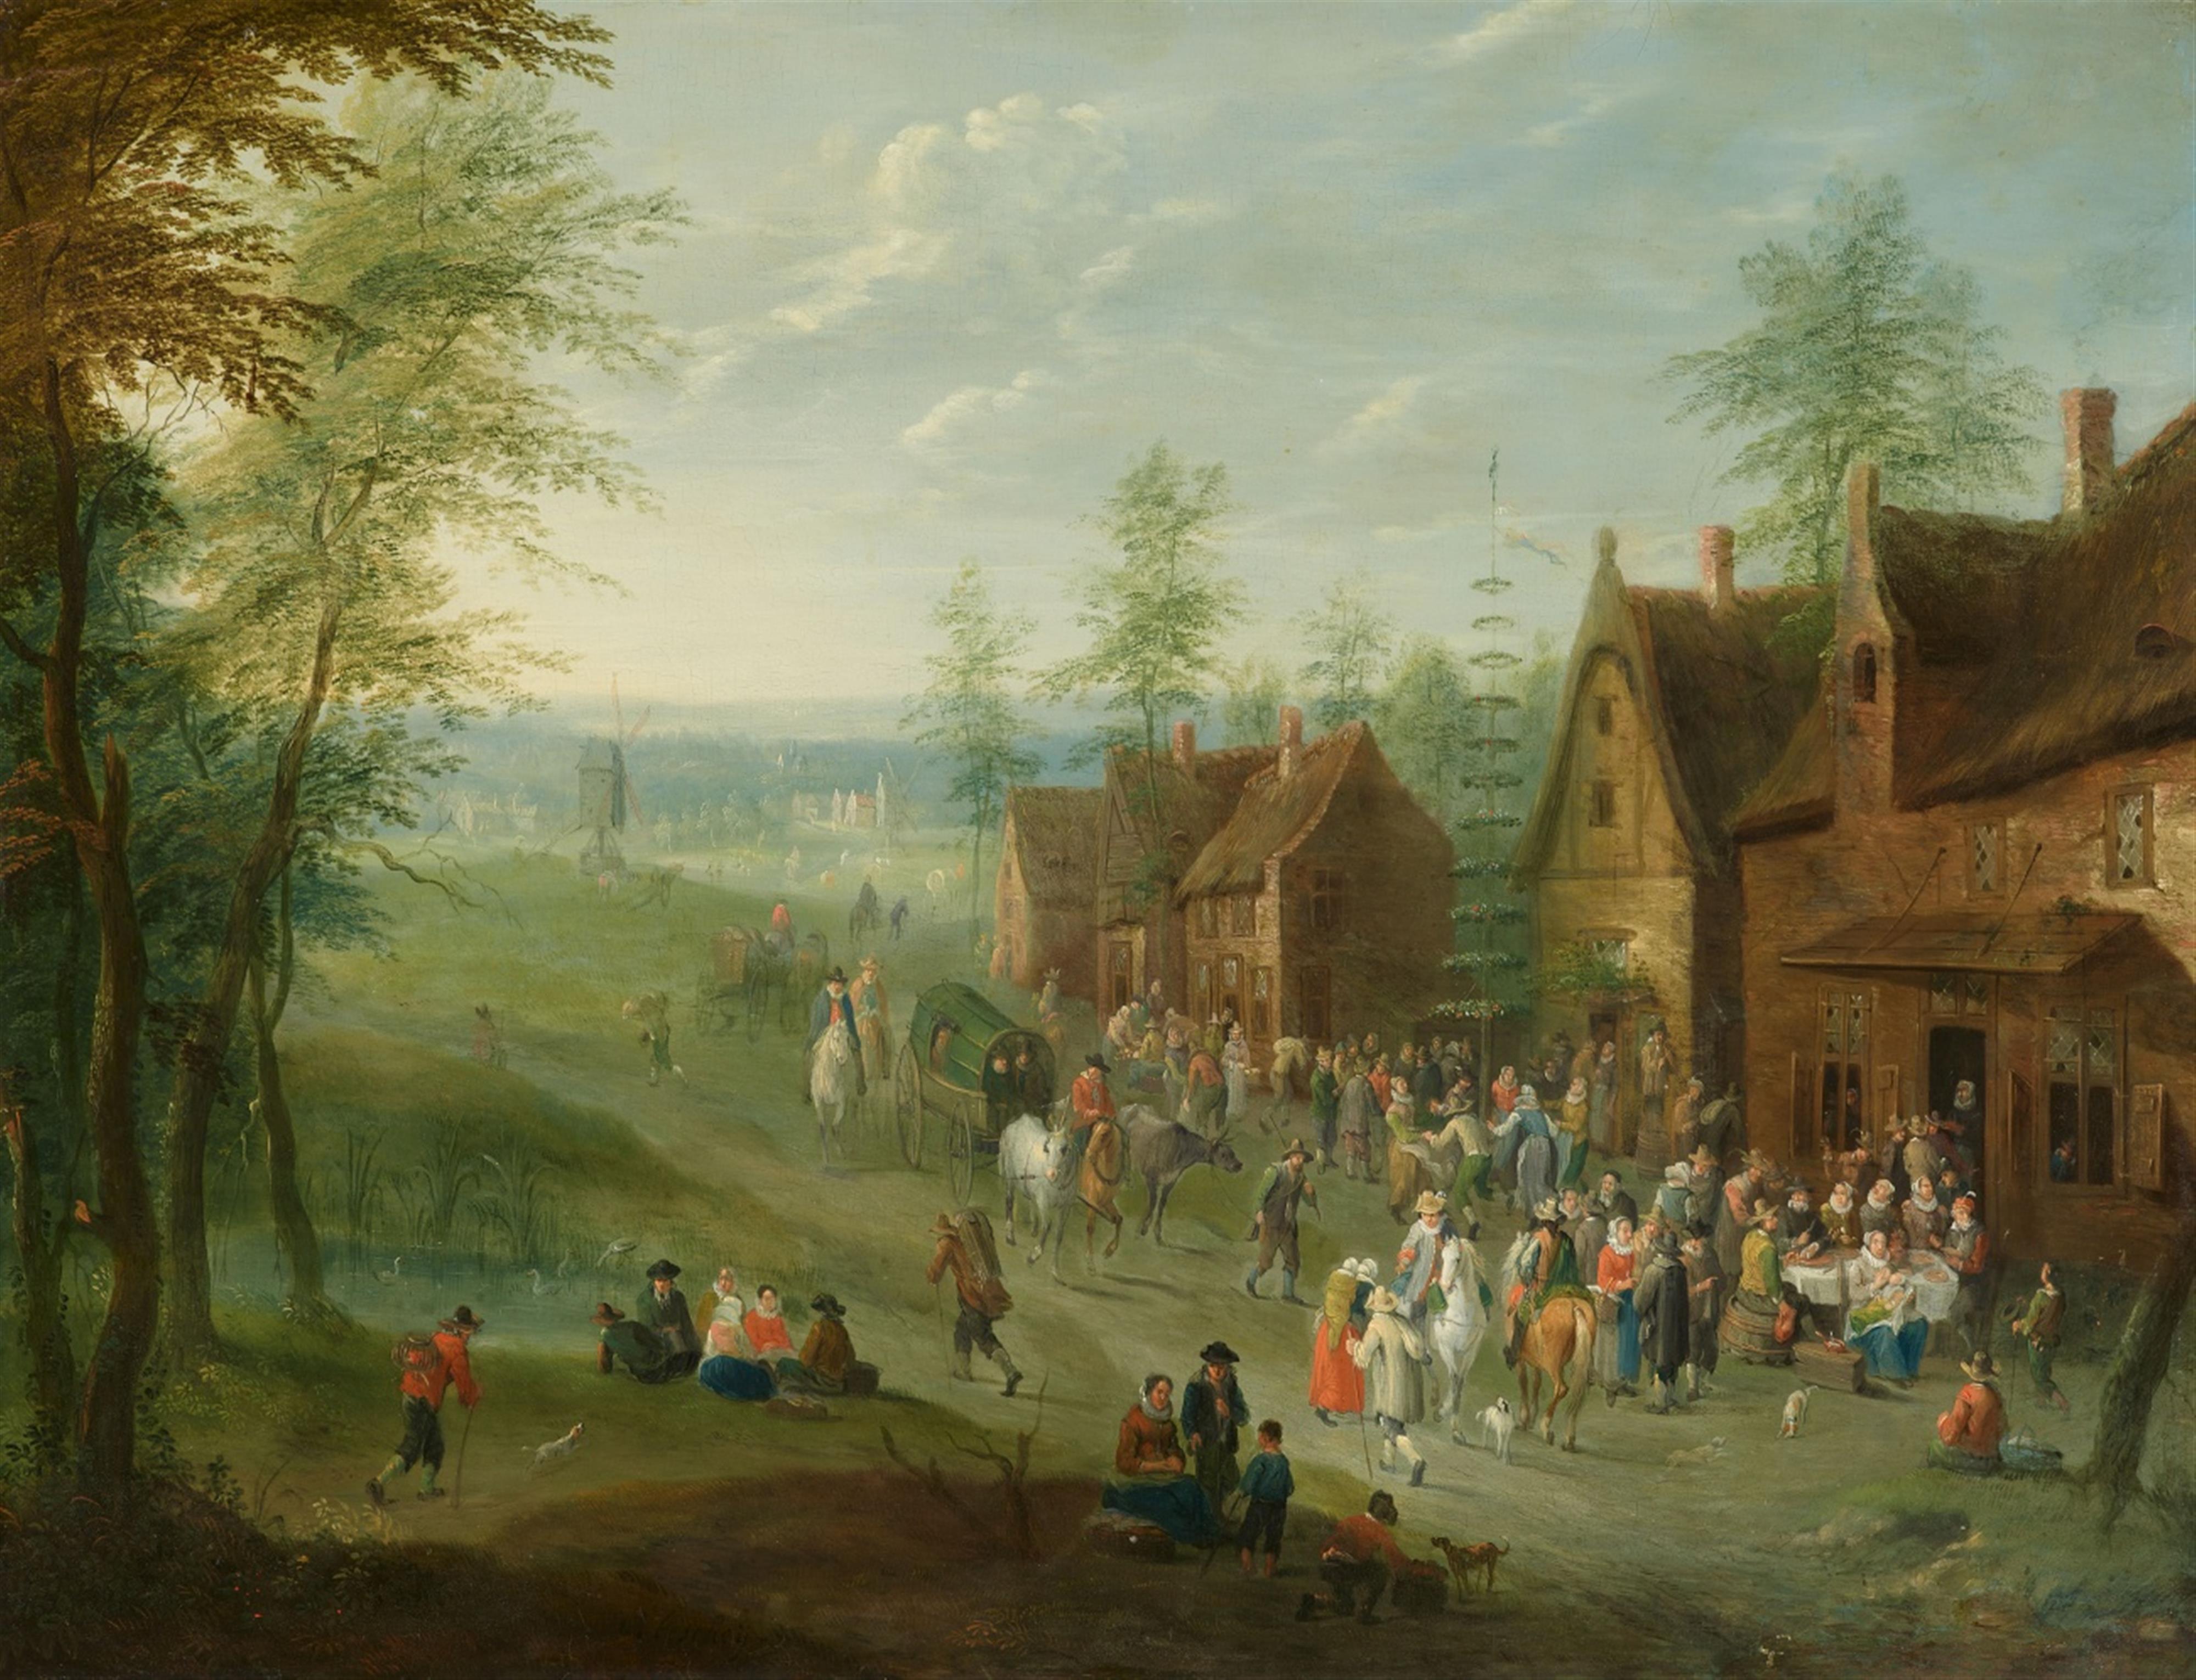 Charles (Karel) Beschey - Village Landscape with Travellers and Peasants - image-1